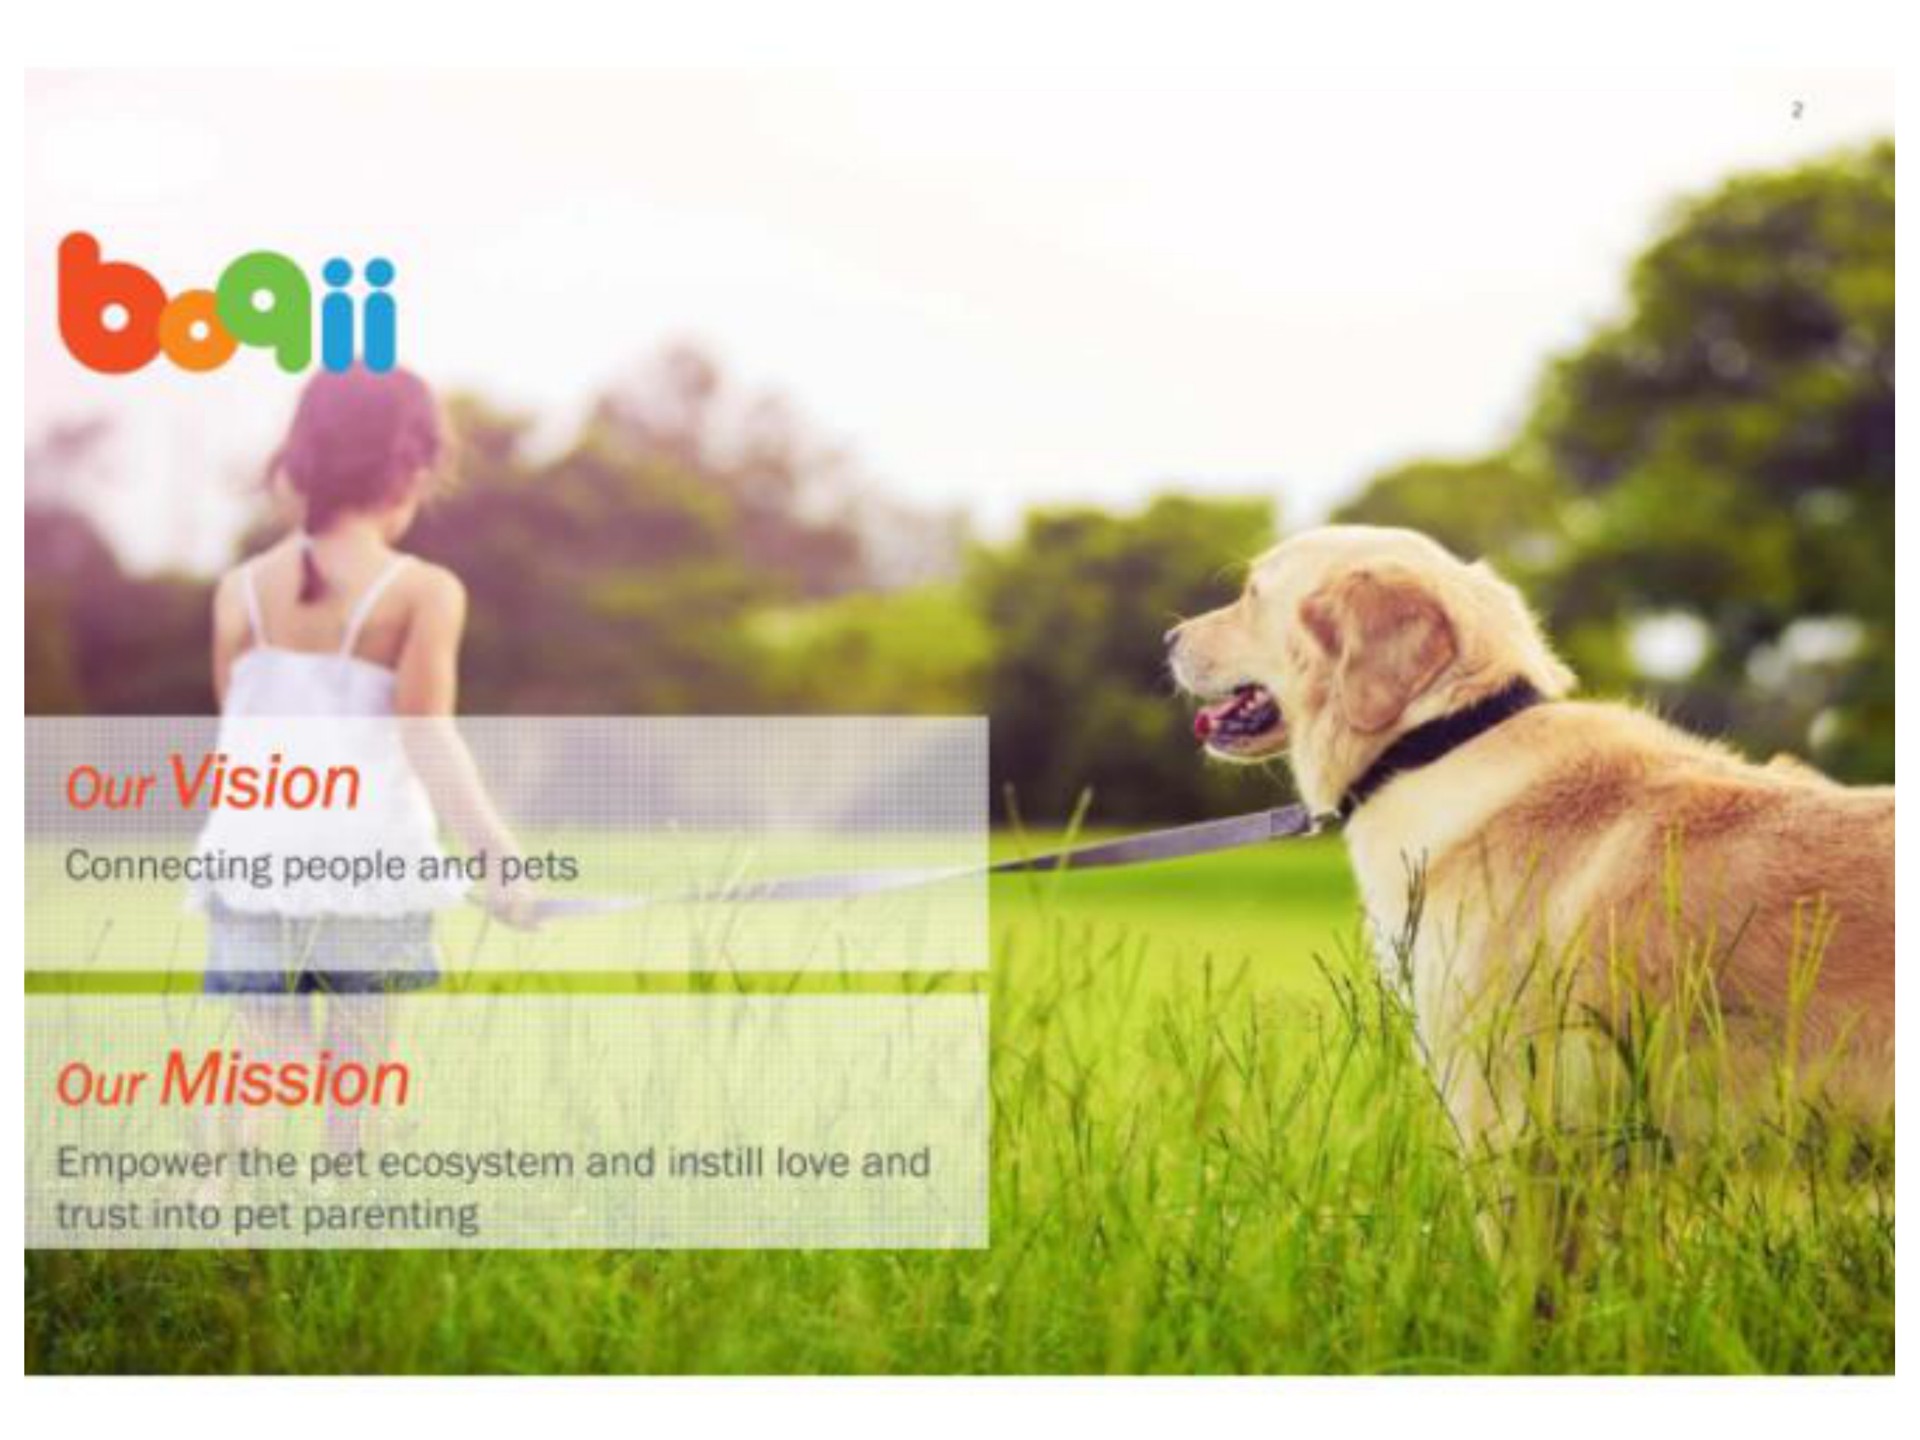 and pets see of our mission empower the pet ecosystem and instill love and pet parenting | Boqii Holding